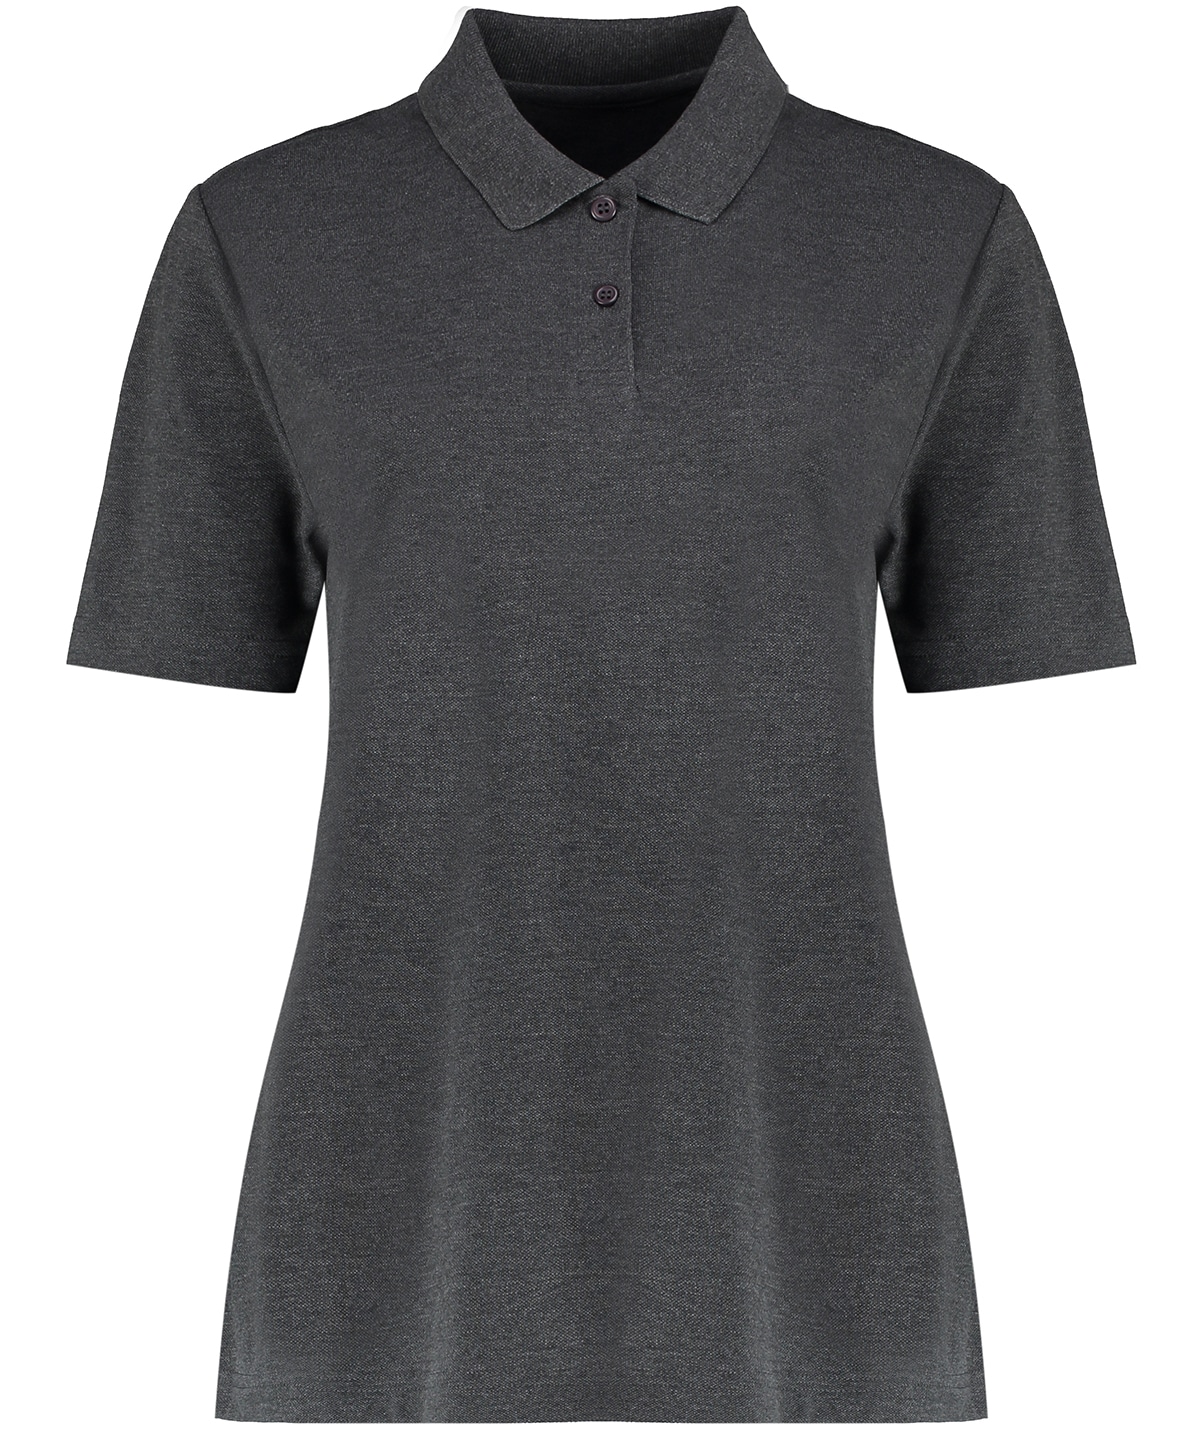 KK722 Dark Grey Marl - Buying custom embroidered polo shirts: Everything you need to know